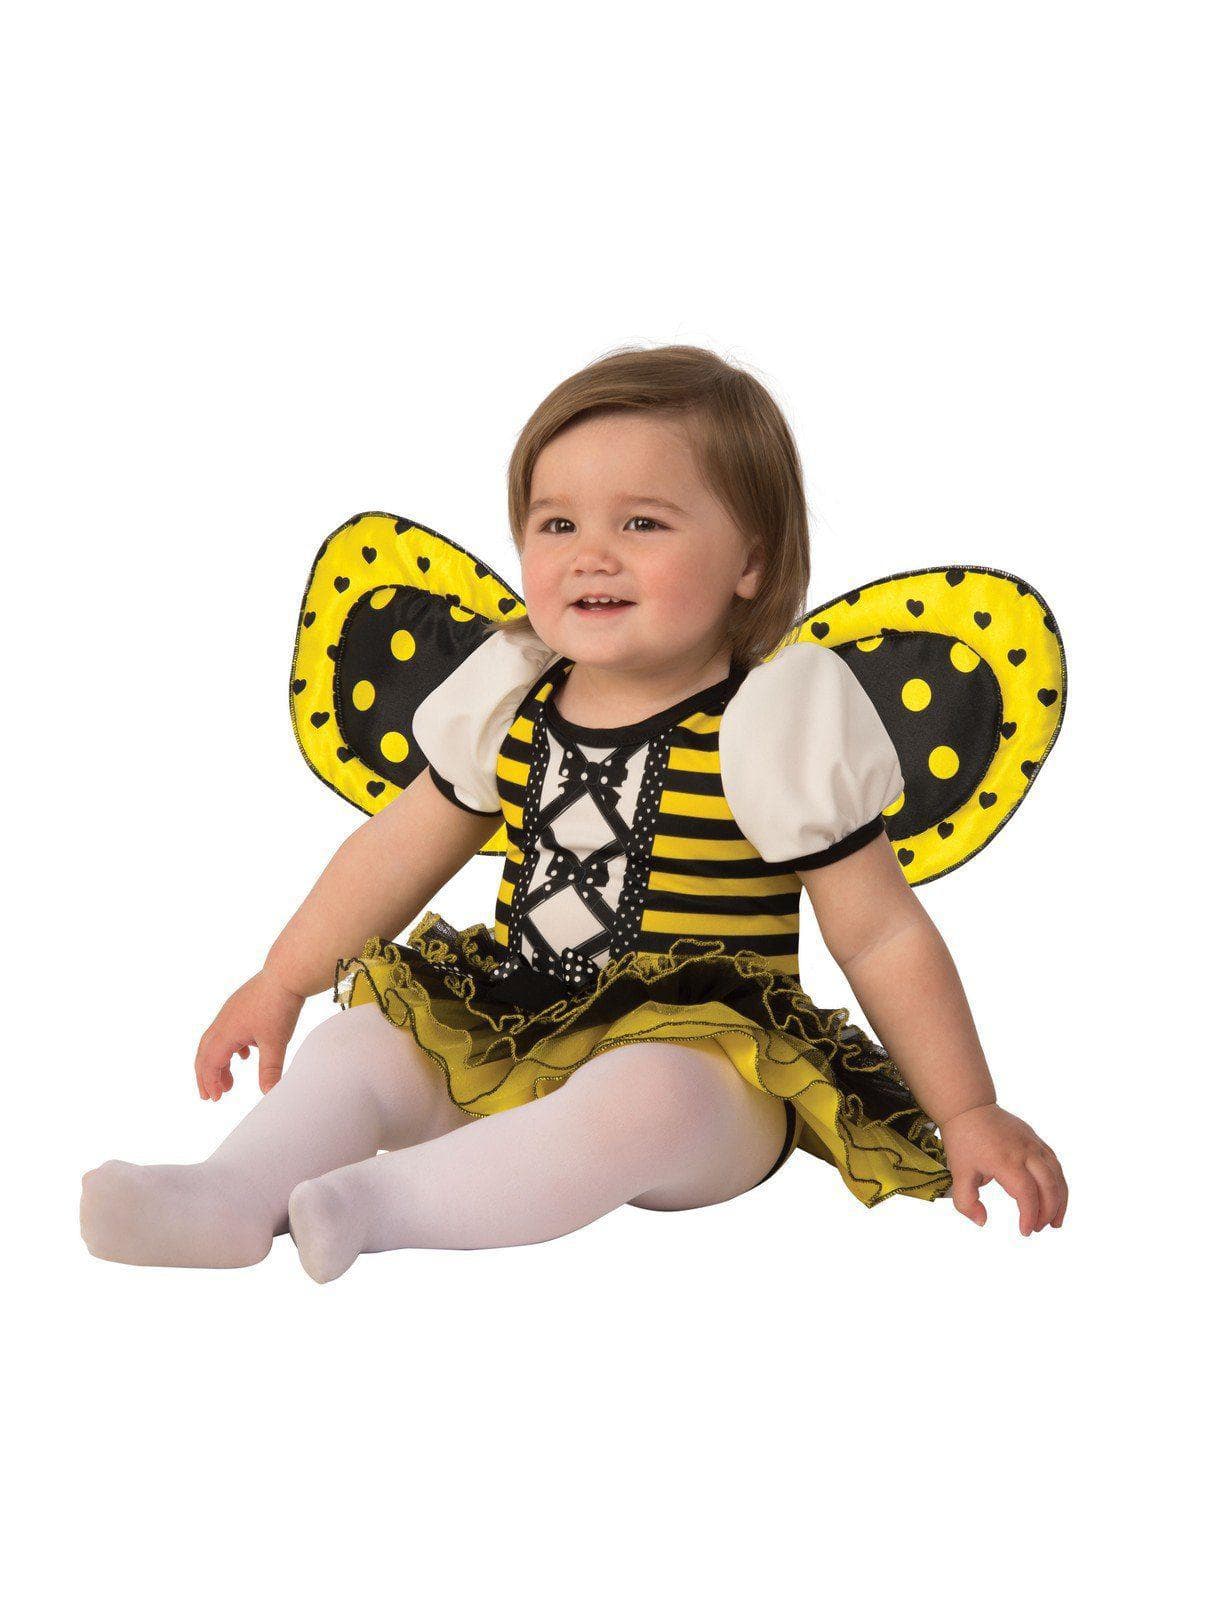 Baby/Toddler Busy Little Bee Costume - costumes.com